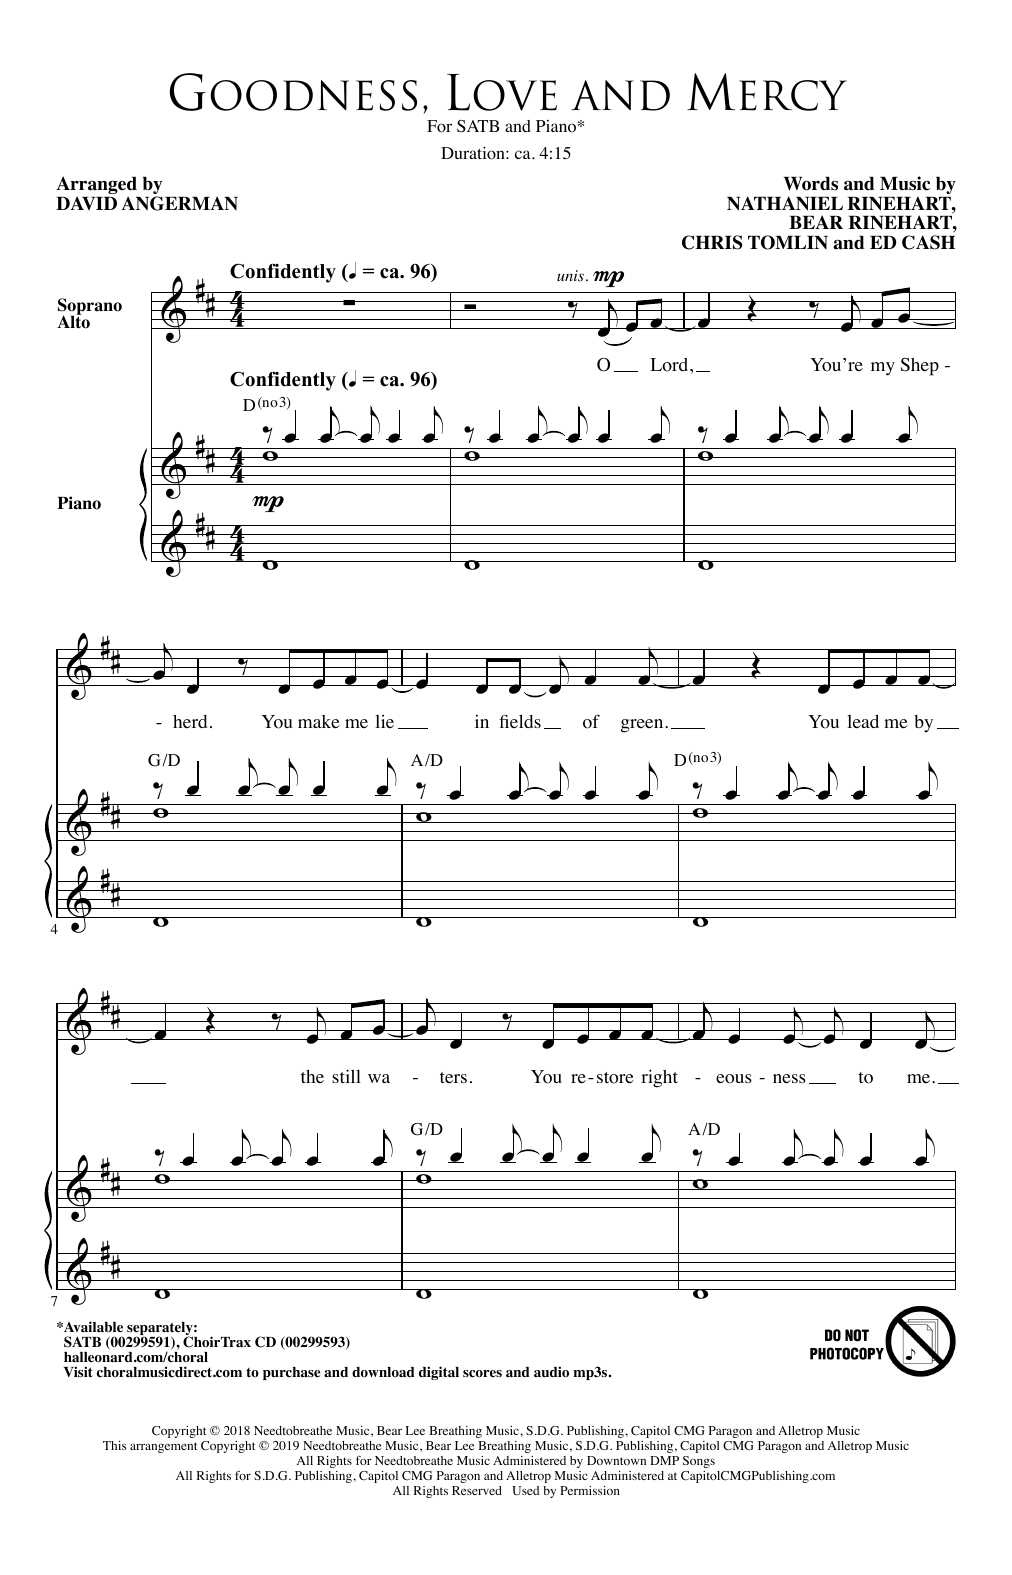 Download Chris Tomlin Goodness, Love And Mercy (arr. David An Sheet Music